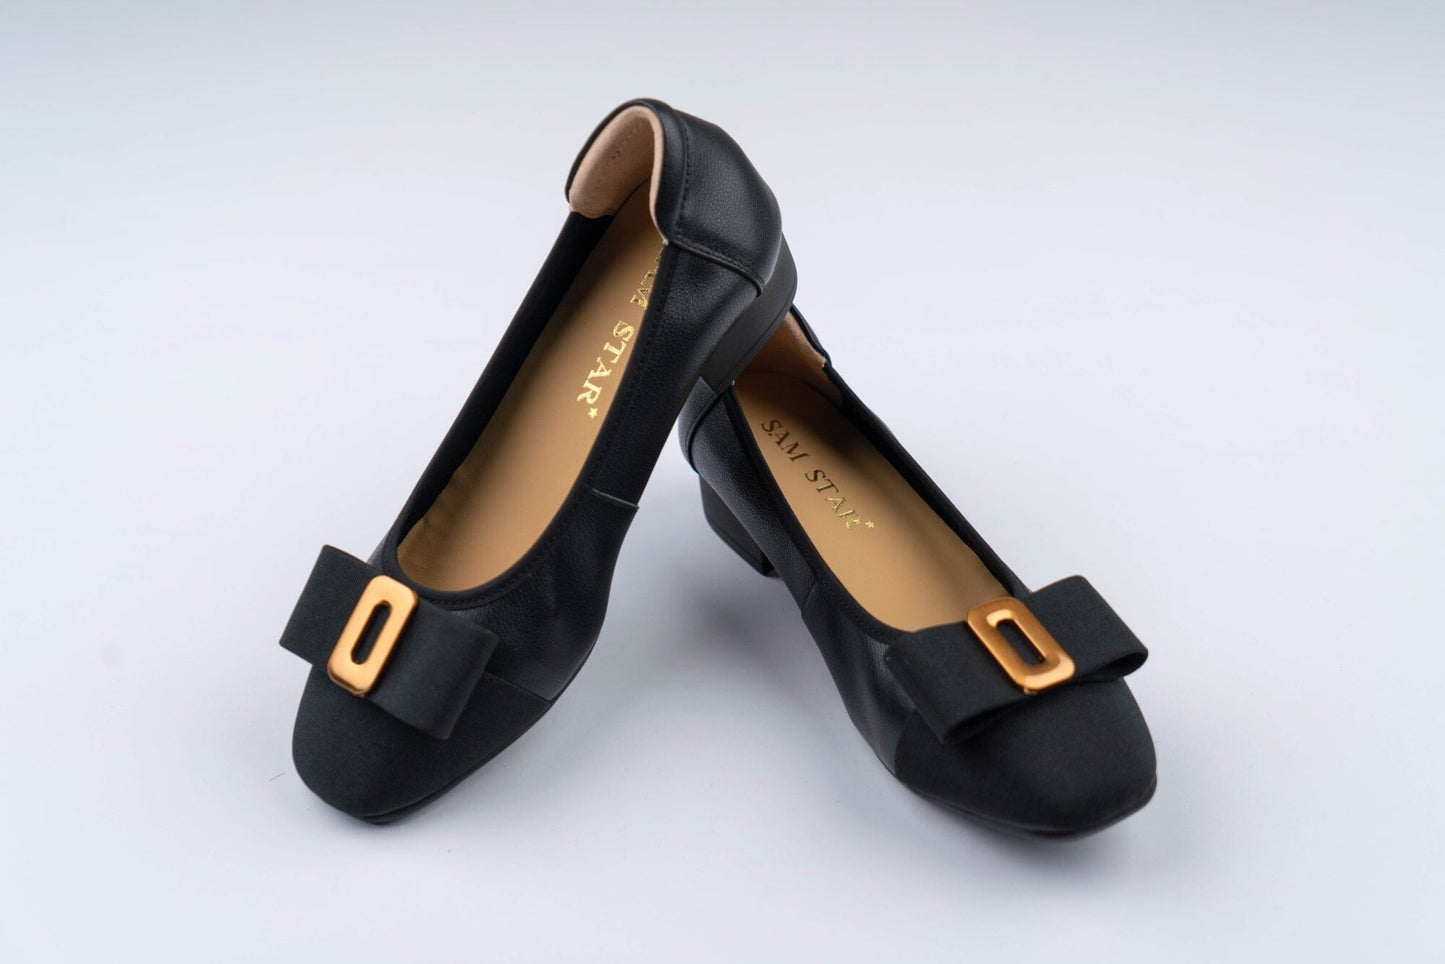 SS23002 Leather pumps with bow& gold buckle block heel ( new arrival ) Pumps Sam Star shoes Black 36/3 